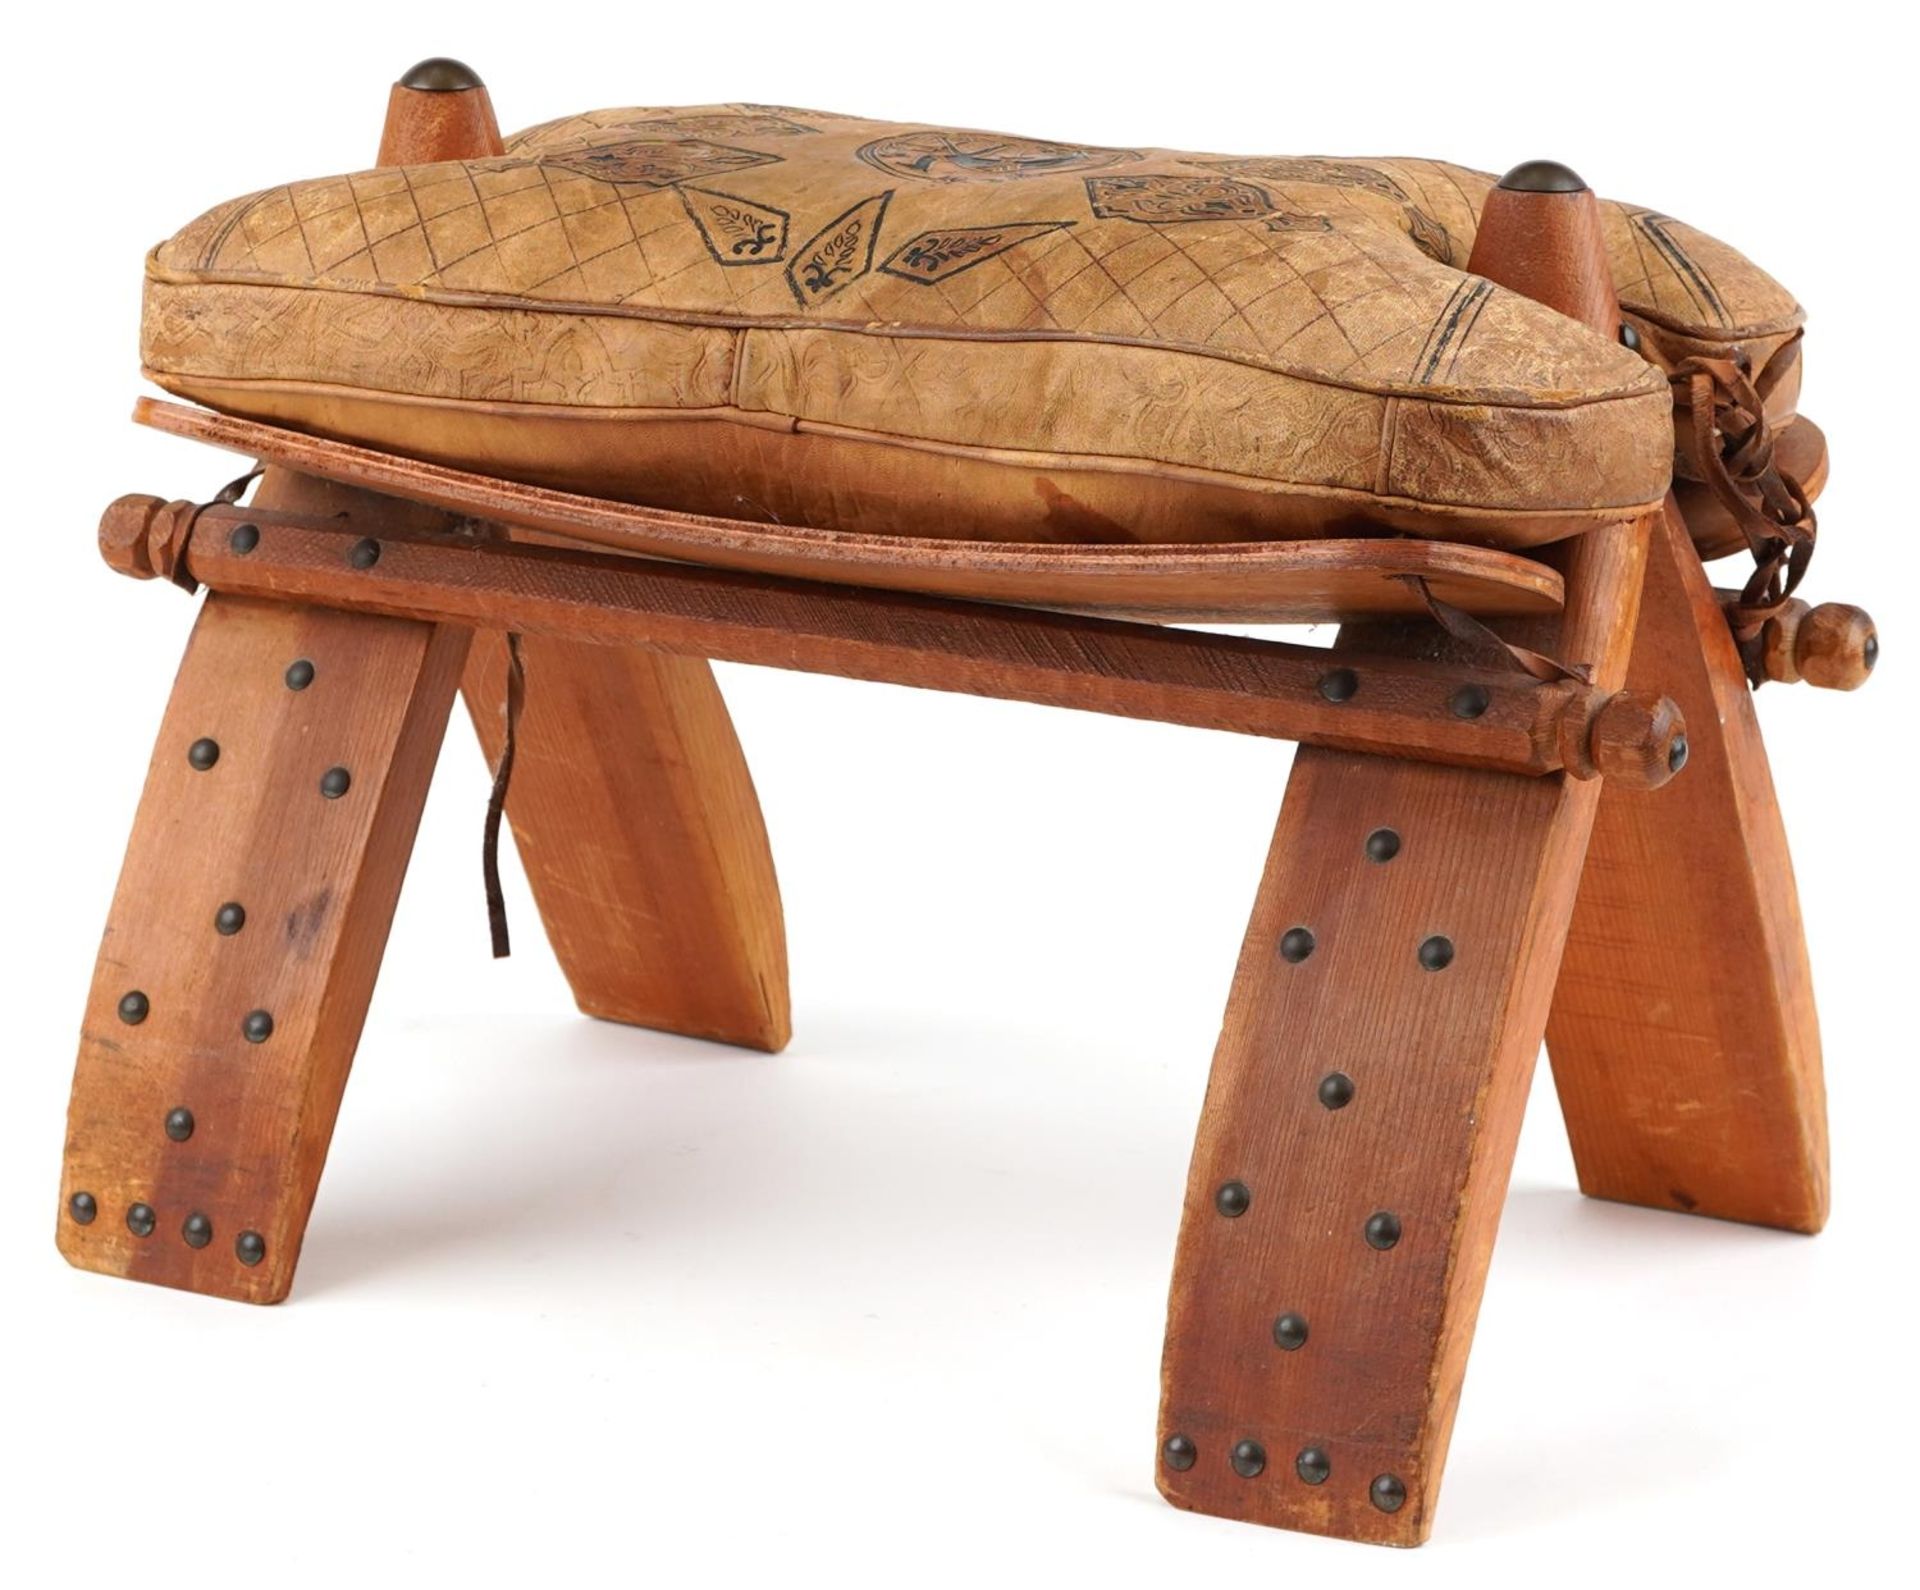 Vintage hardwood camel stool with leather upholstered cushion tooled with foliate motifs and a - Image 3 of 5